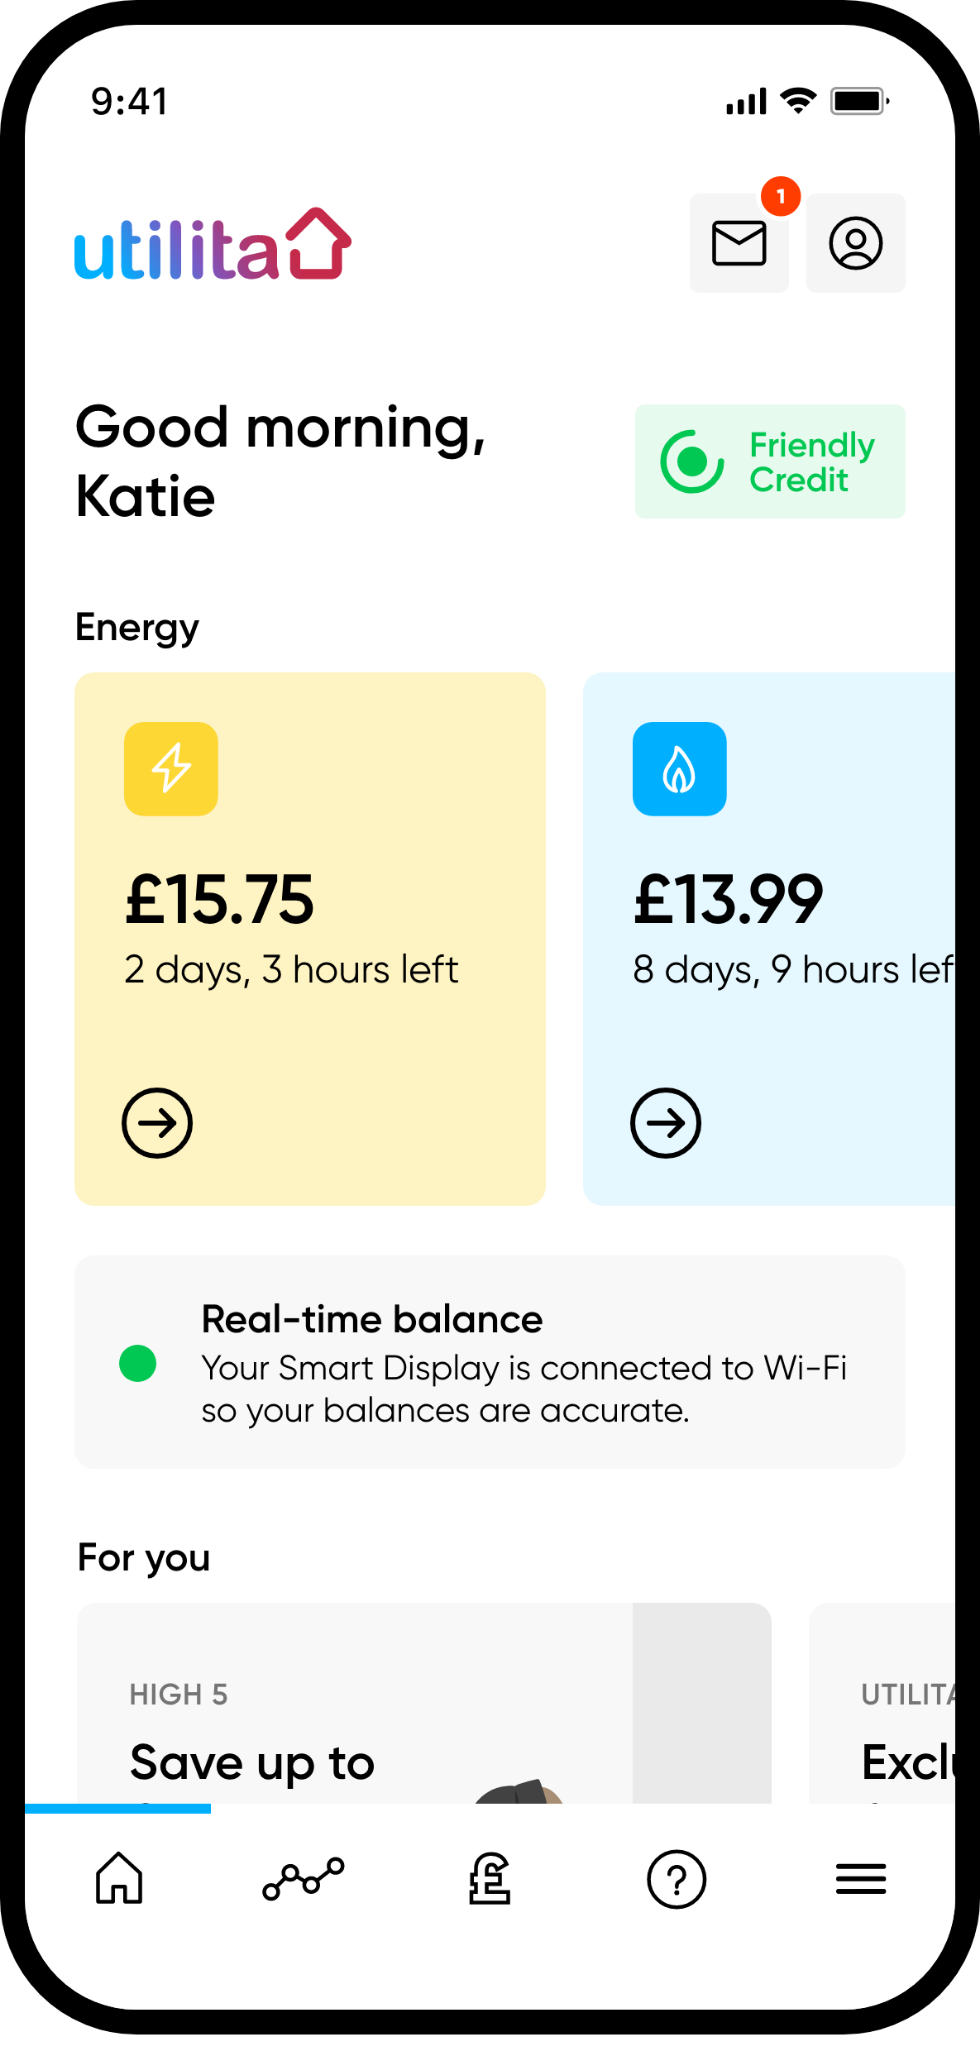 Top right corner of a smart phone showing that Friendly Credit hours
                    are active in the My Utilita energy app